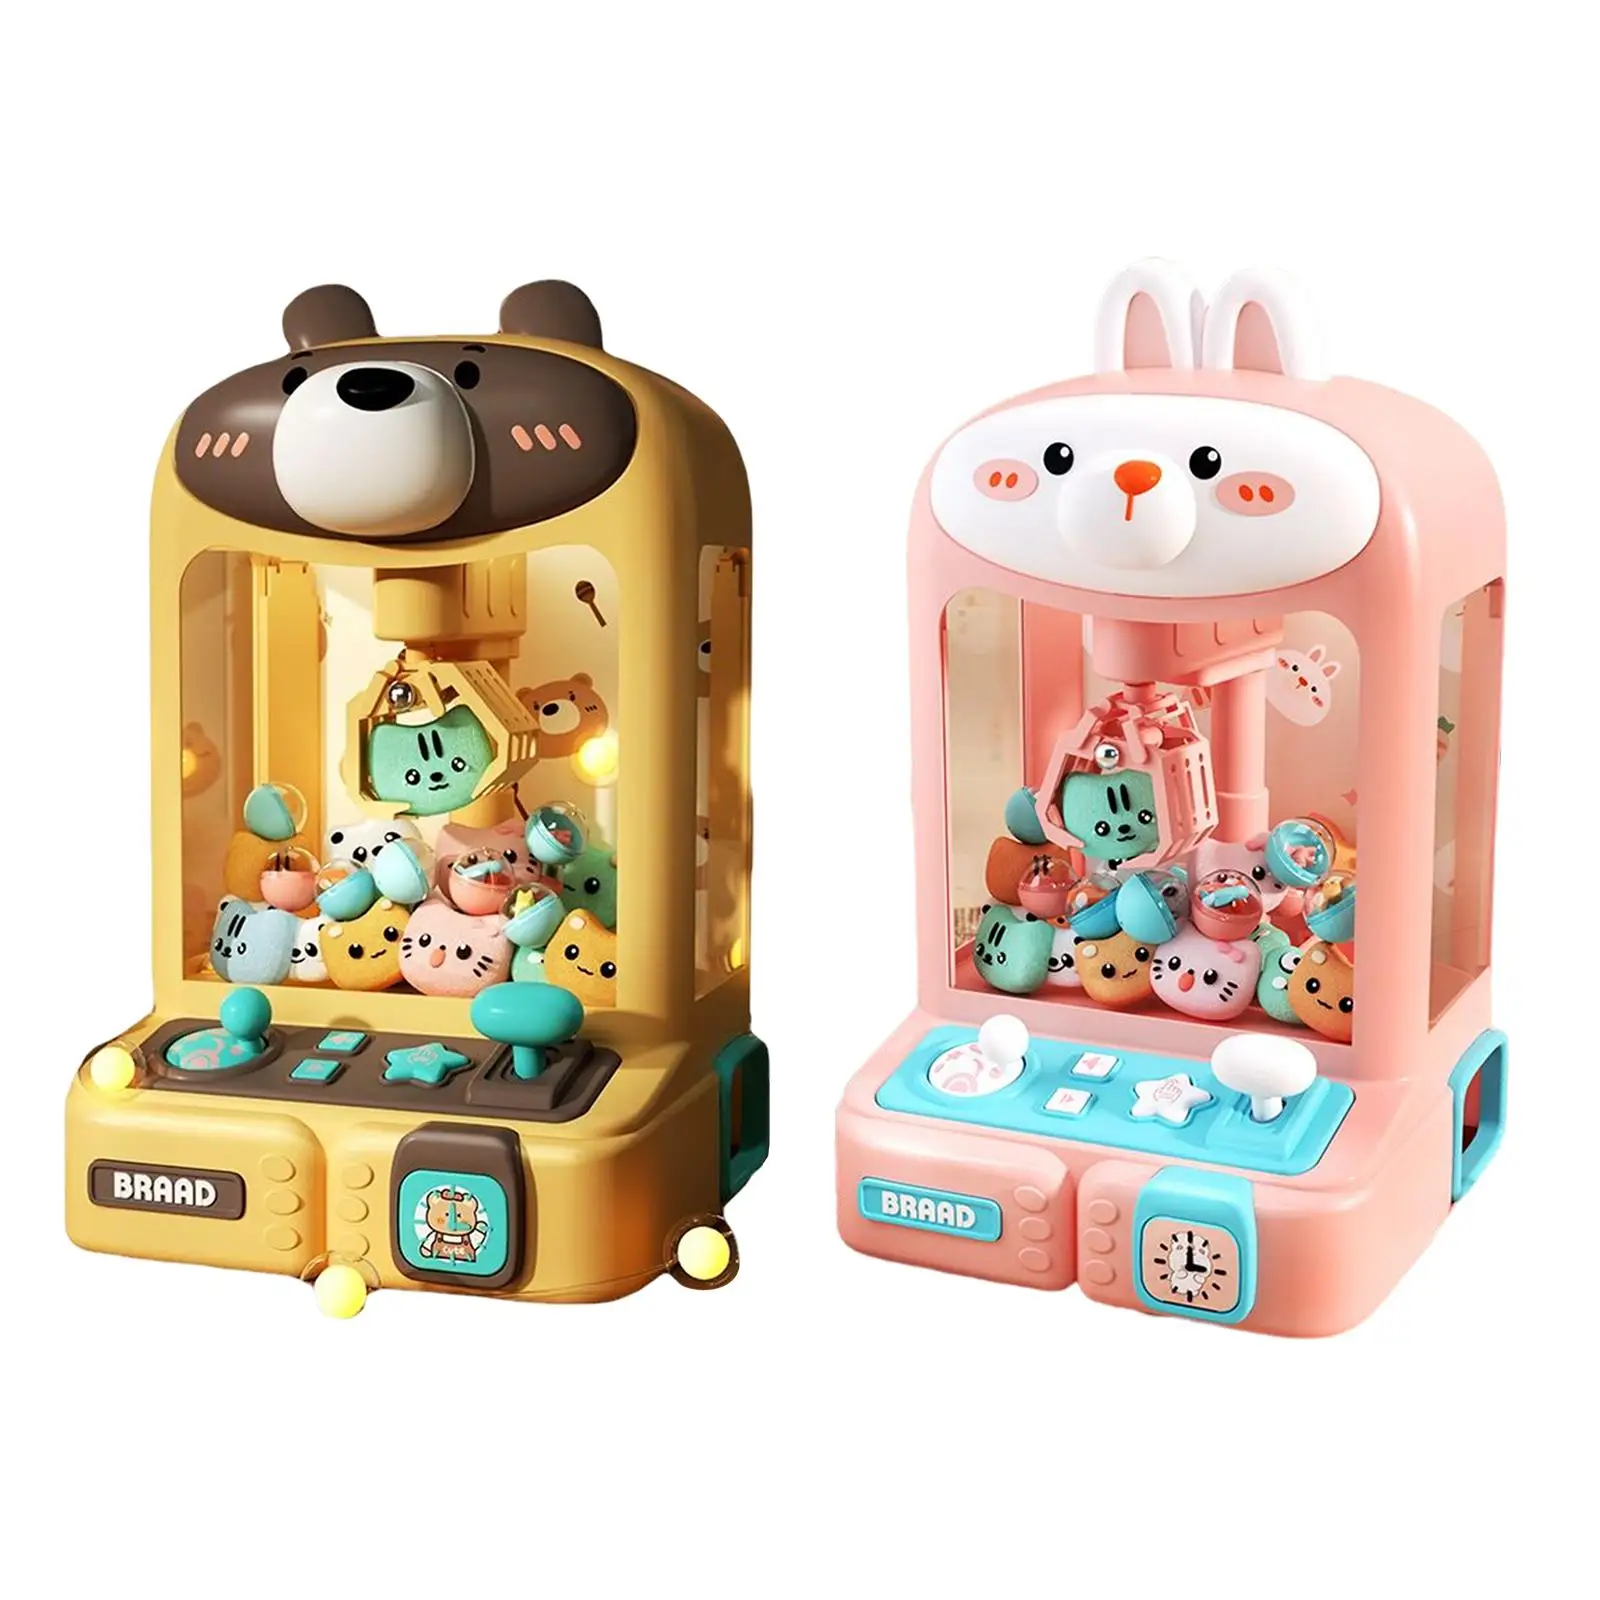 

Claw Machine with 10 Mini Plush Animals Mini Vending Machine Arcade Candy Capsule Claw Game Prizes Toy for Boys Girls Adults